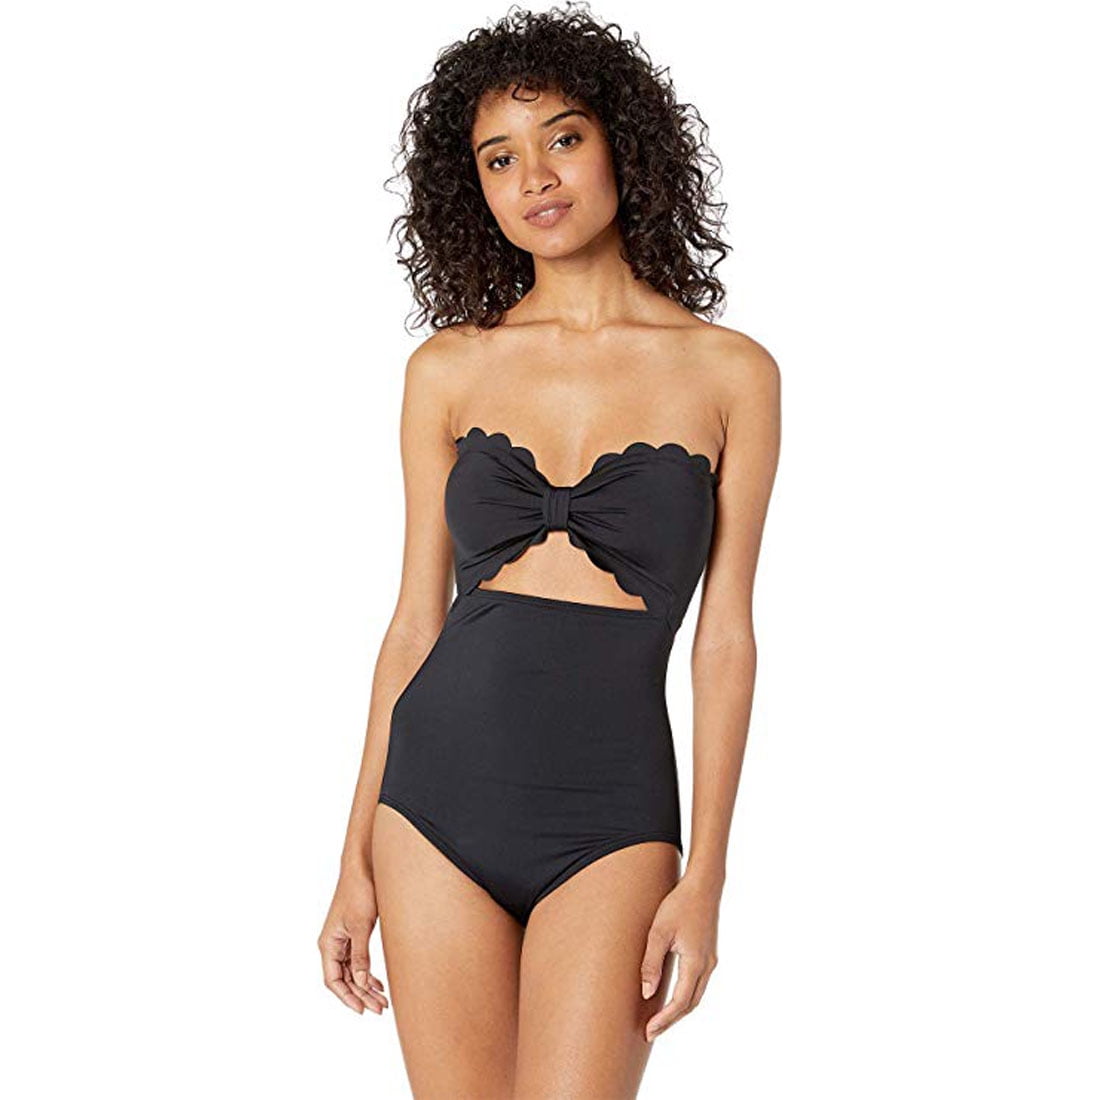 Kate Spade New York Core Scalloped Cut Out Bandeau One-Piece, Black, Medium  